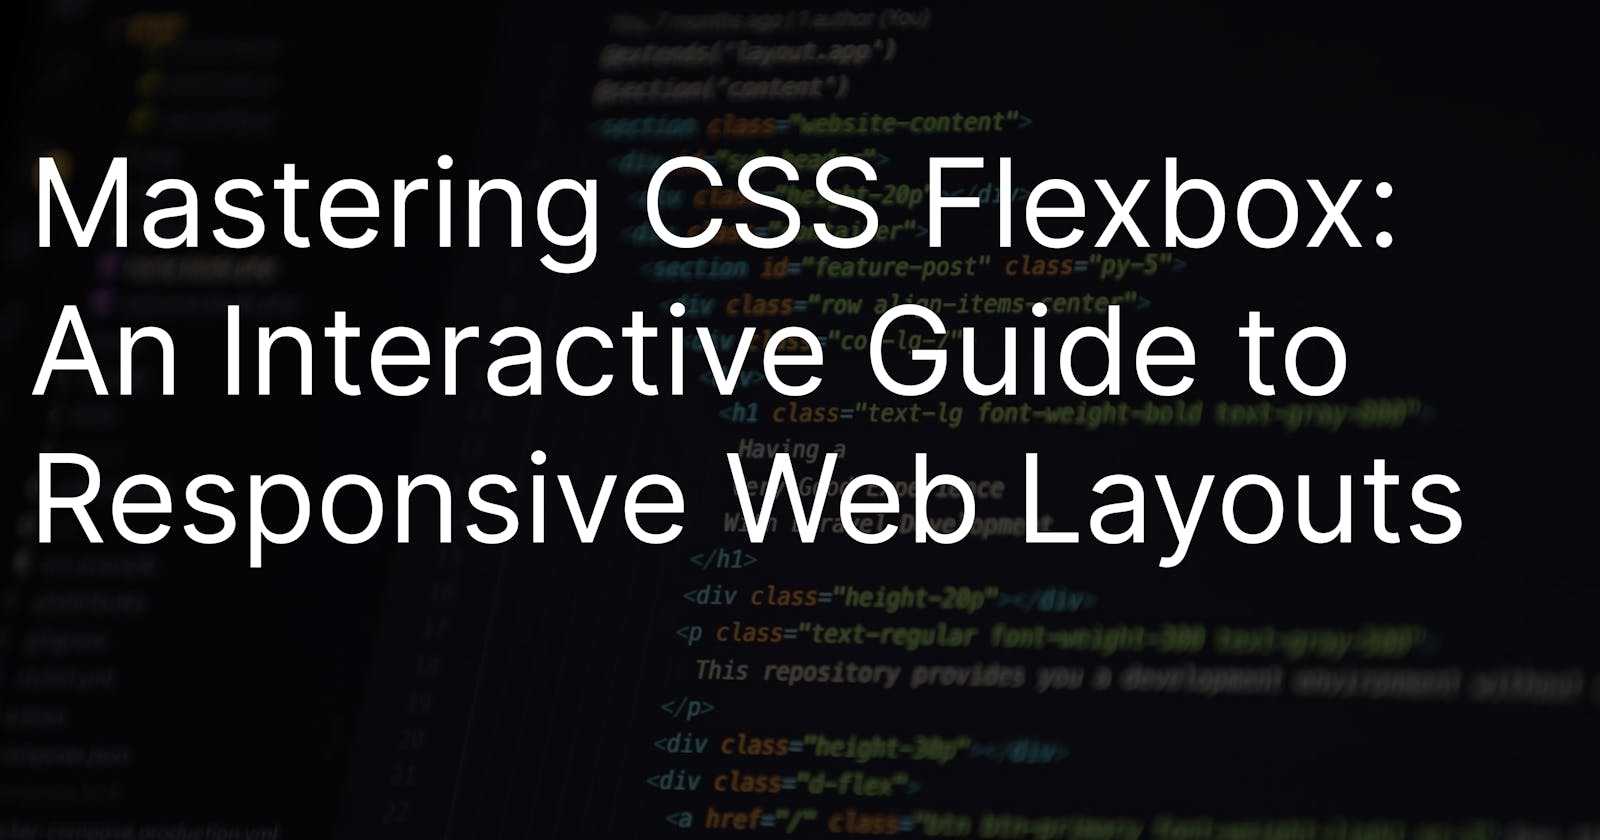 Mastering CSS Flexbox: An Interactive Guide to Responsive Web Layouts